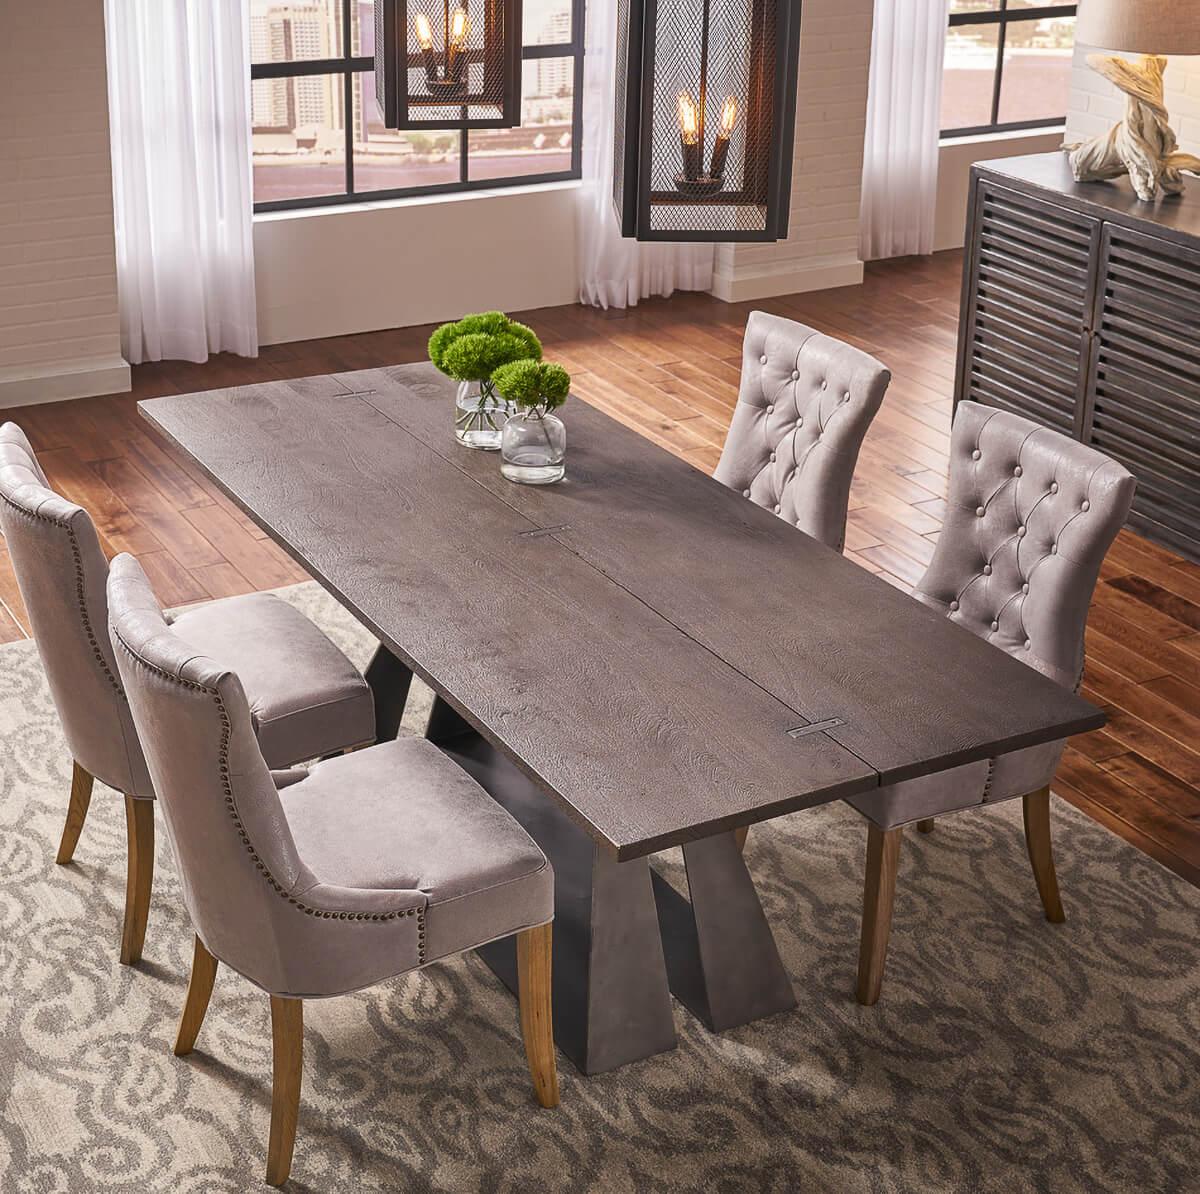 Contemporary Modern Industrial Design Dining Table